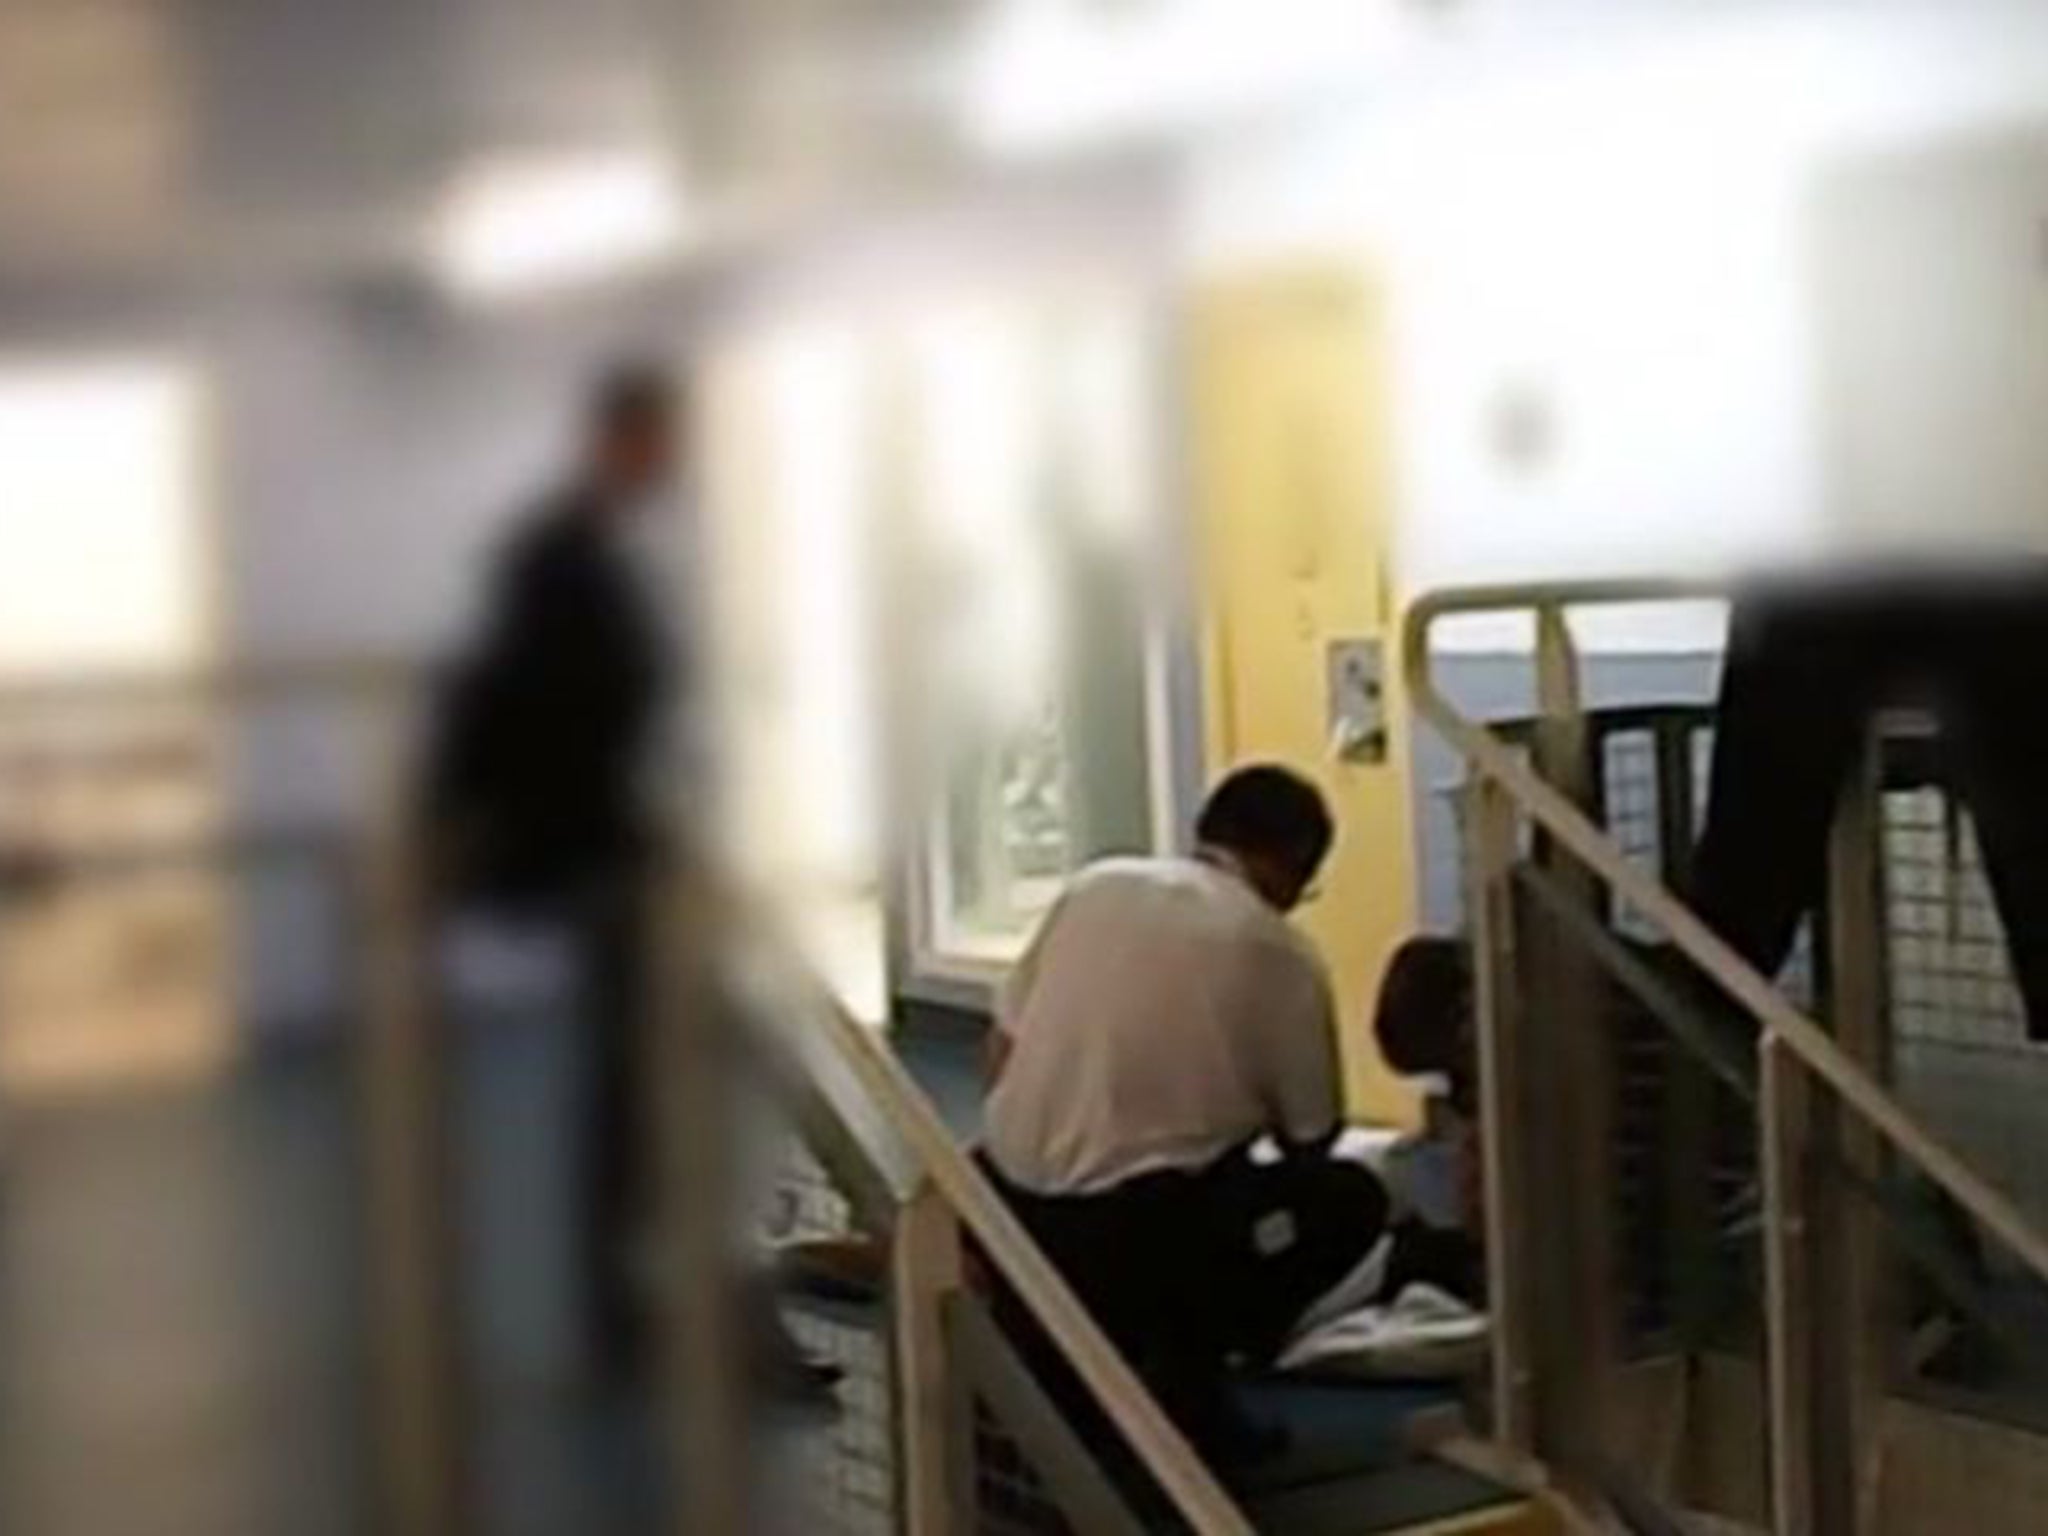 Footage shows a detainee being attended to following an epileptic fit